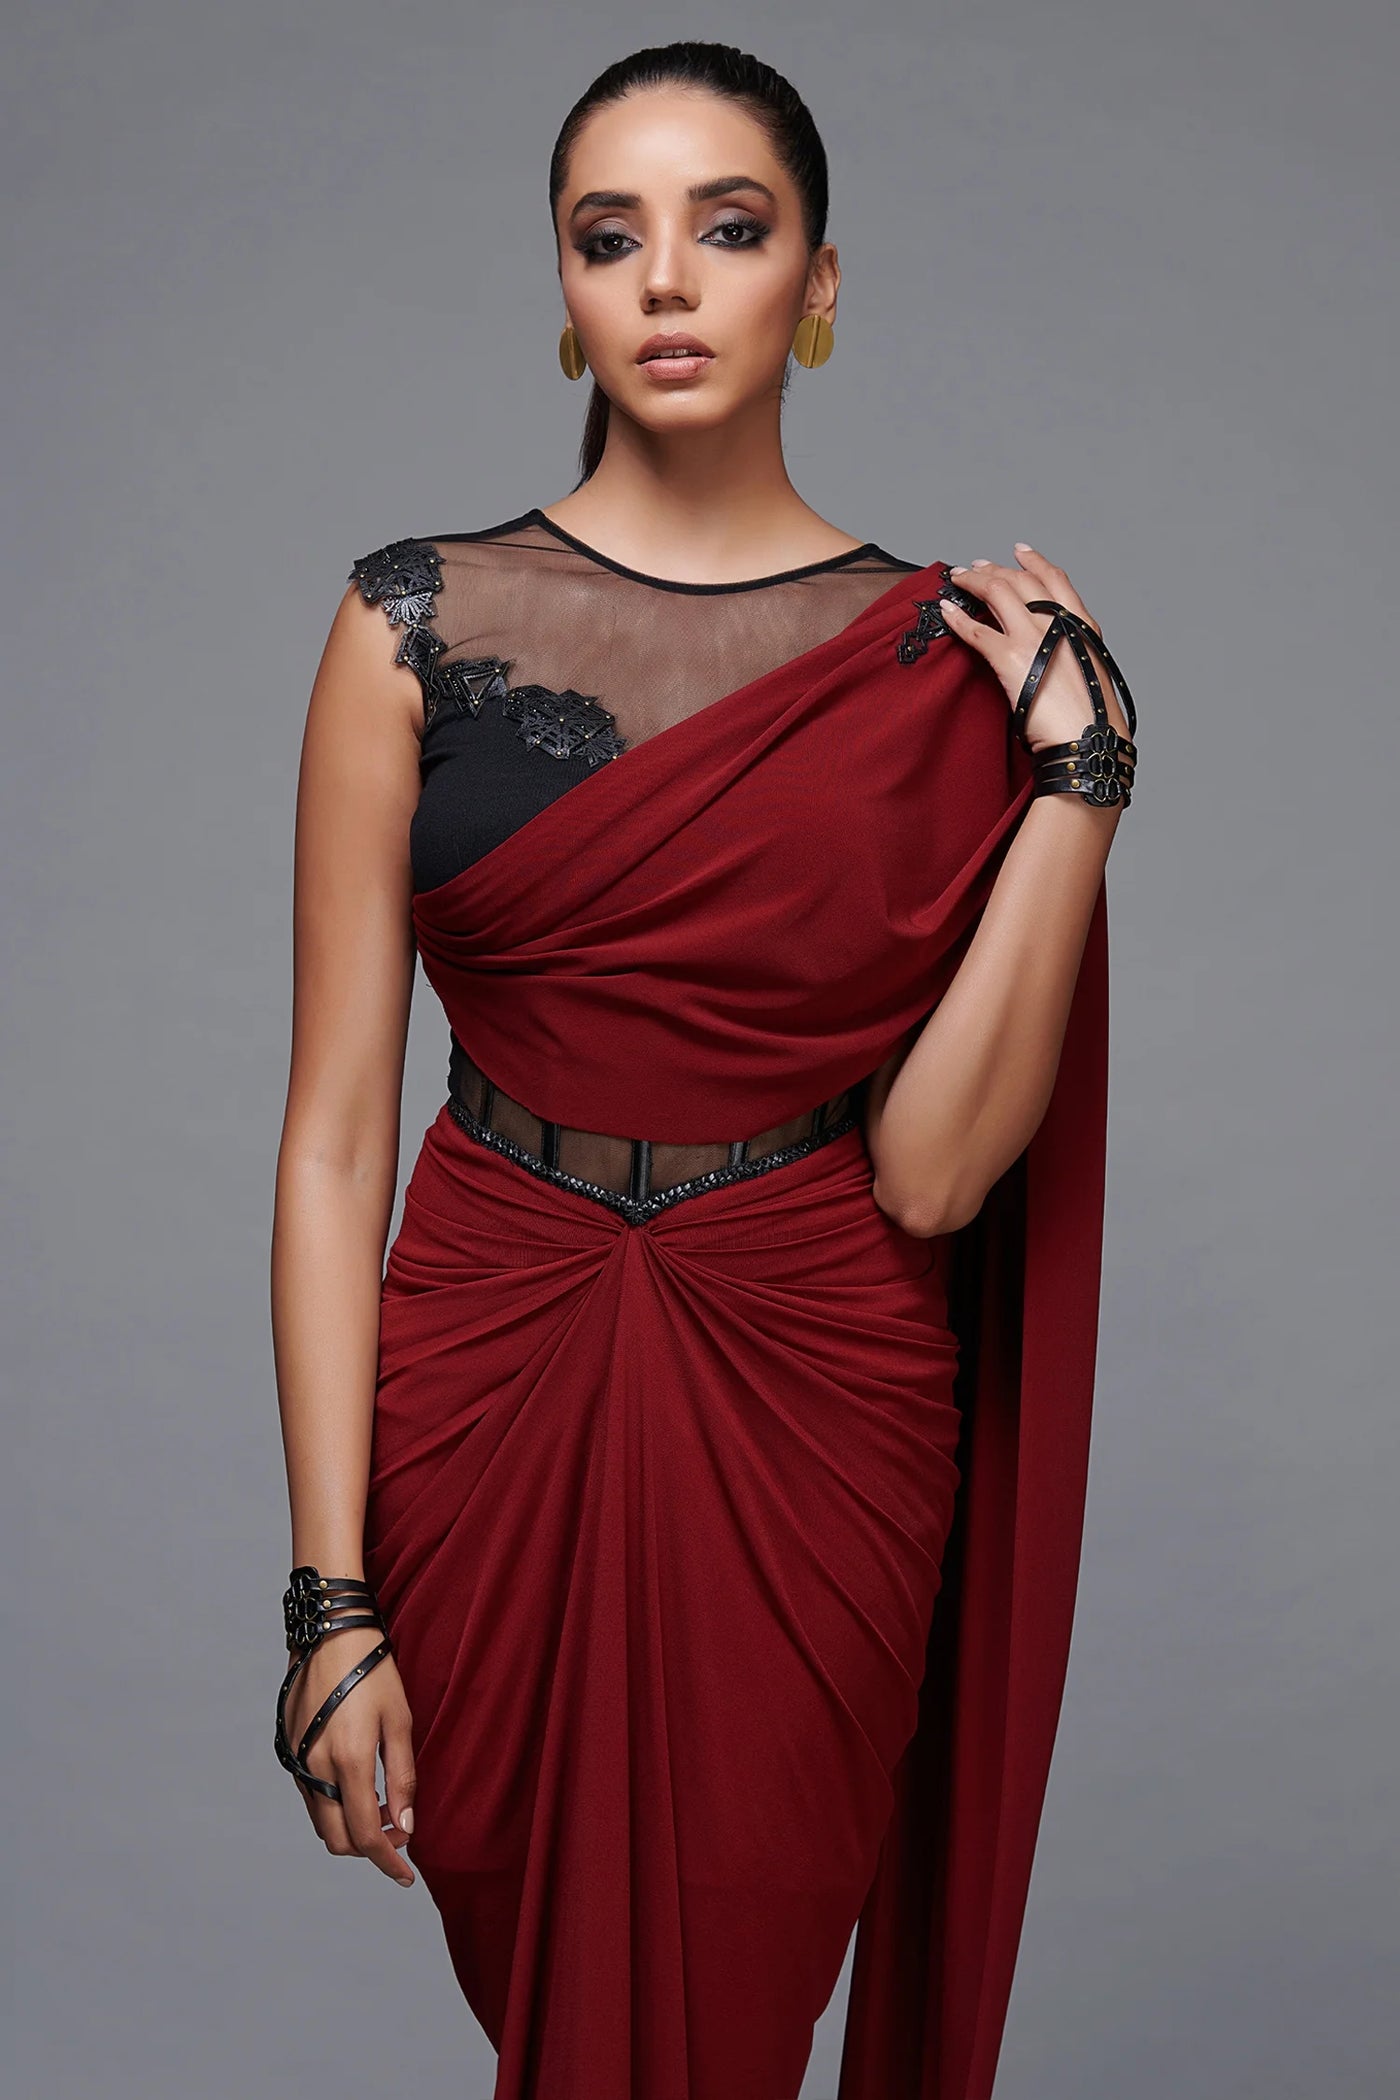 Red Poly Jersey Saree Gown - Indian Clothing in Denver, CO, Aurora, CO, Boulder, CO, Fort Collins, CO, Colorado Springs, CO, Parker, CO, Highlands Ranch, CO, Cherry Creek, CO, Centennial, CO, and Longmont, CO. Nationwide shipping USA - India Fashion X